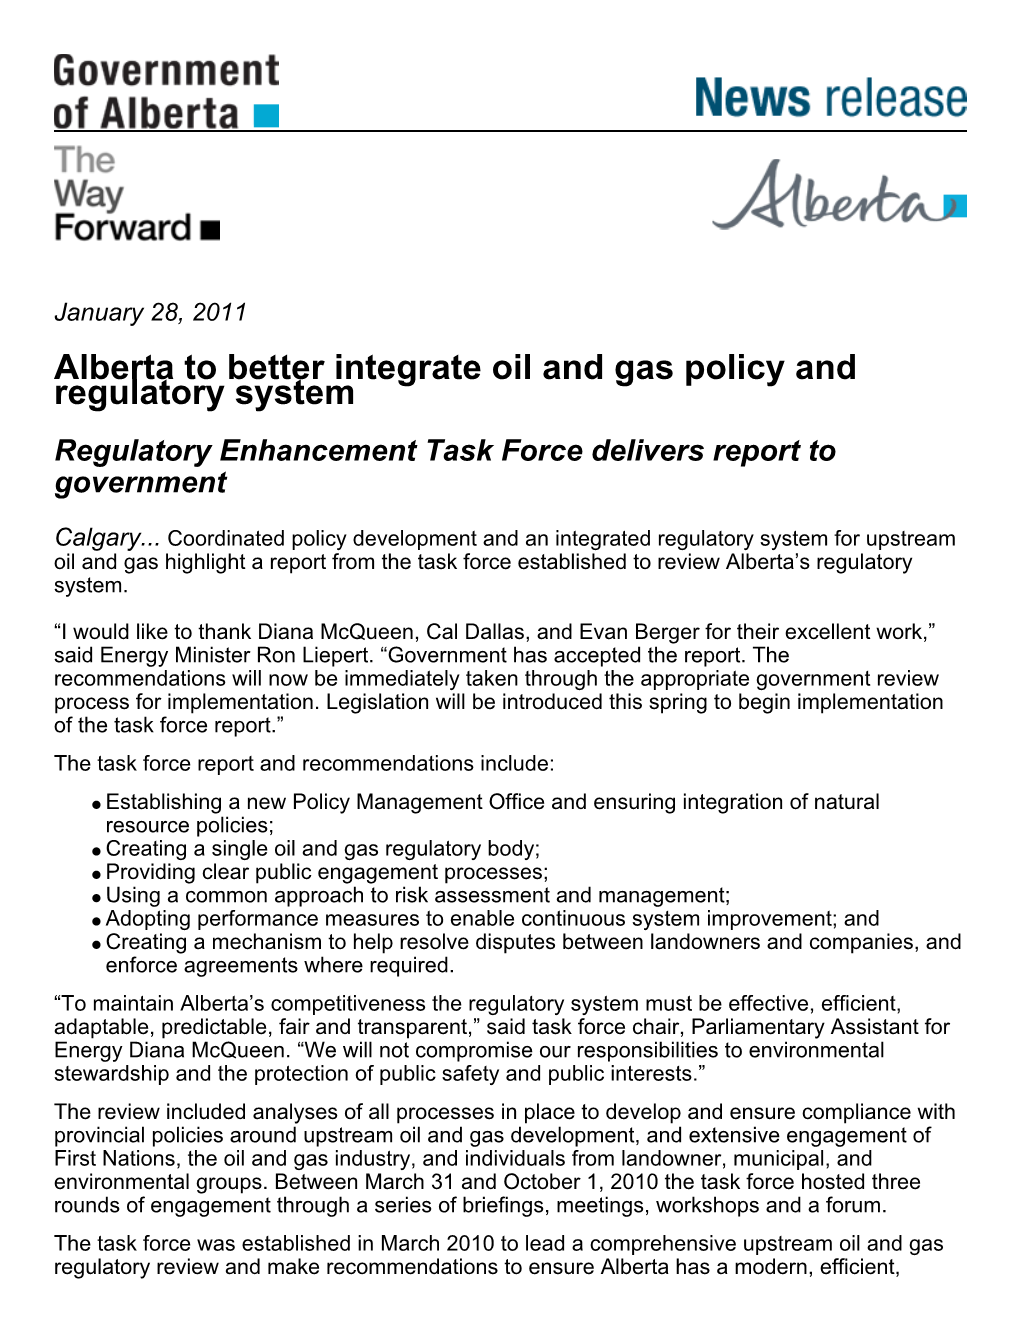 Alberta to Better Integrate Oil and Gas Policy and Regulatory System Regulatory Enhancement Task Force Delivers Report to Government